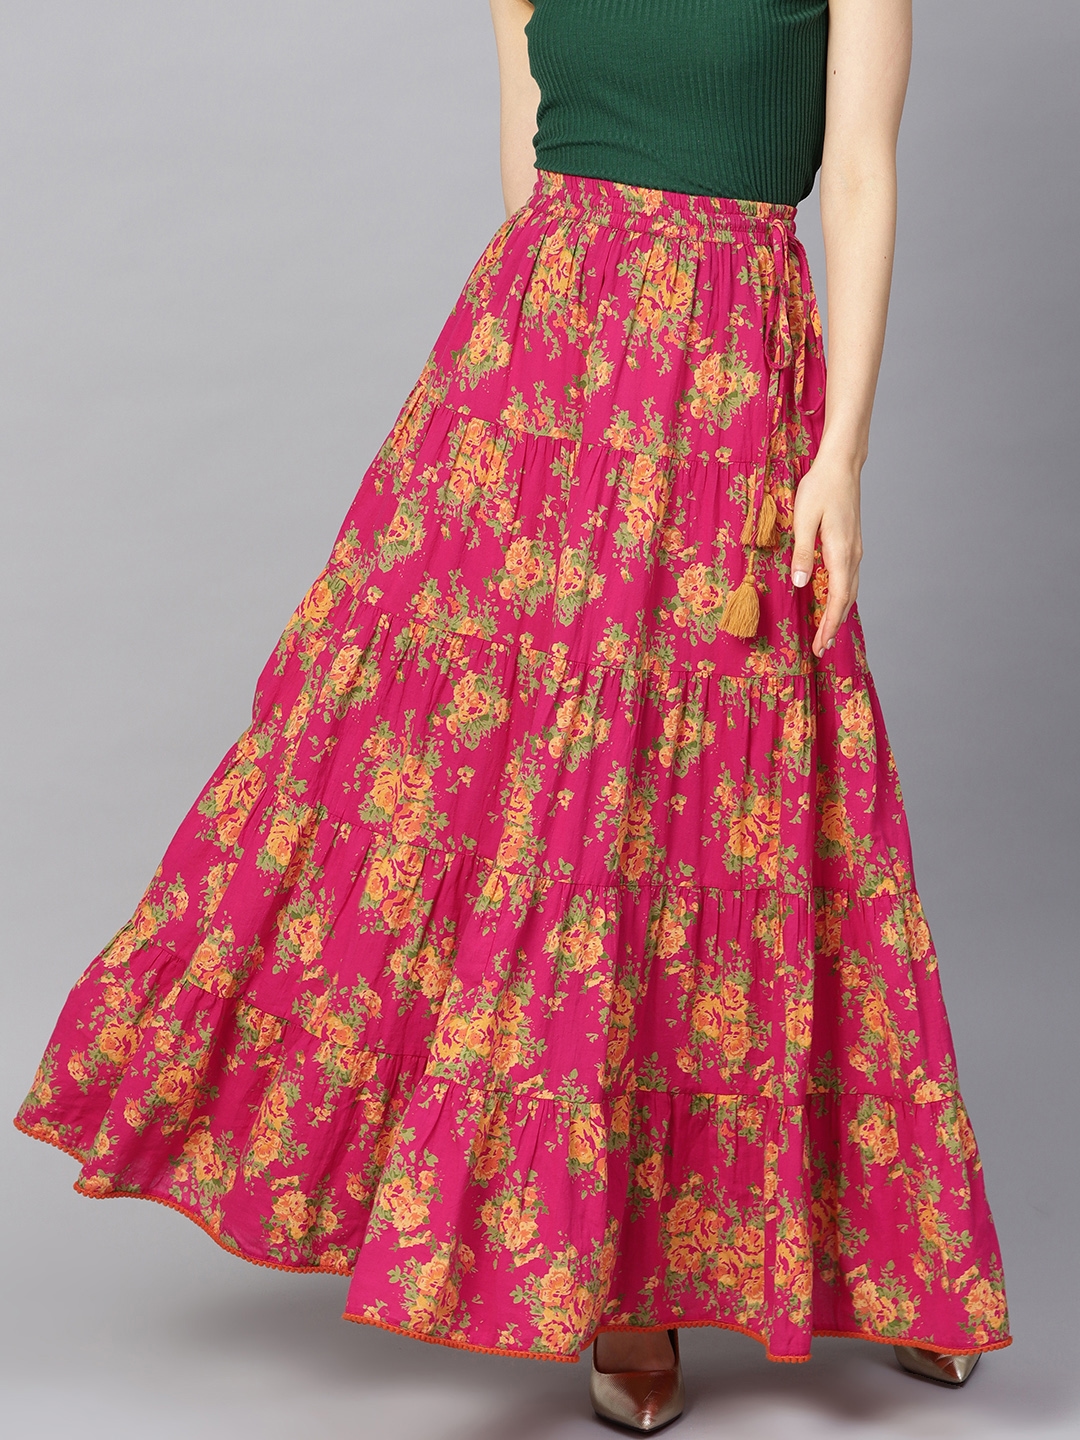 Aggregate more than 50 long skirts online myntra best